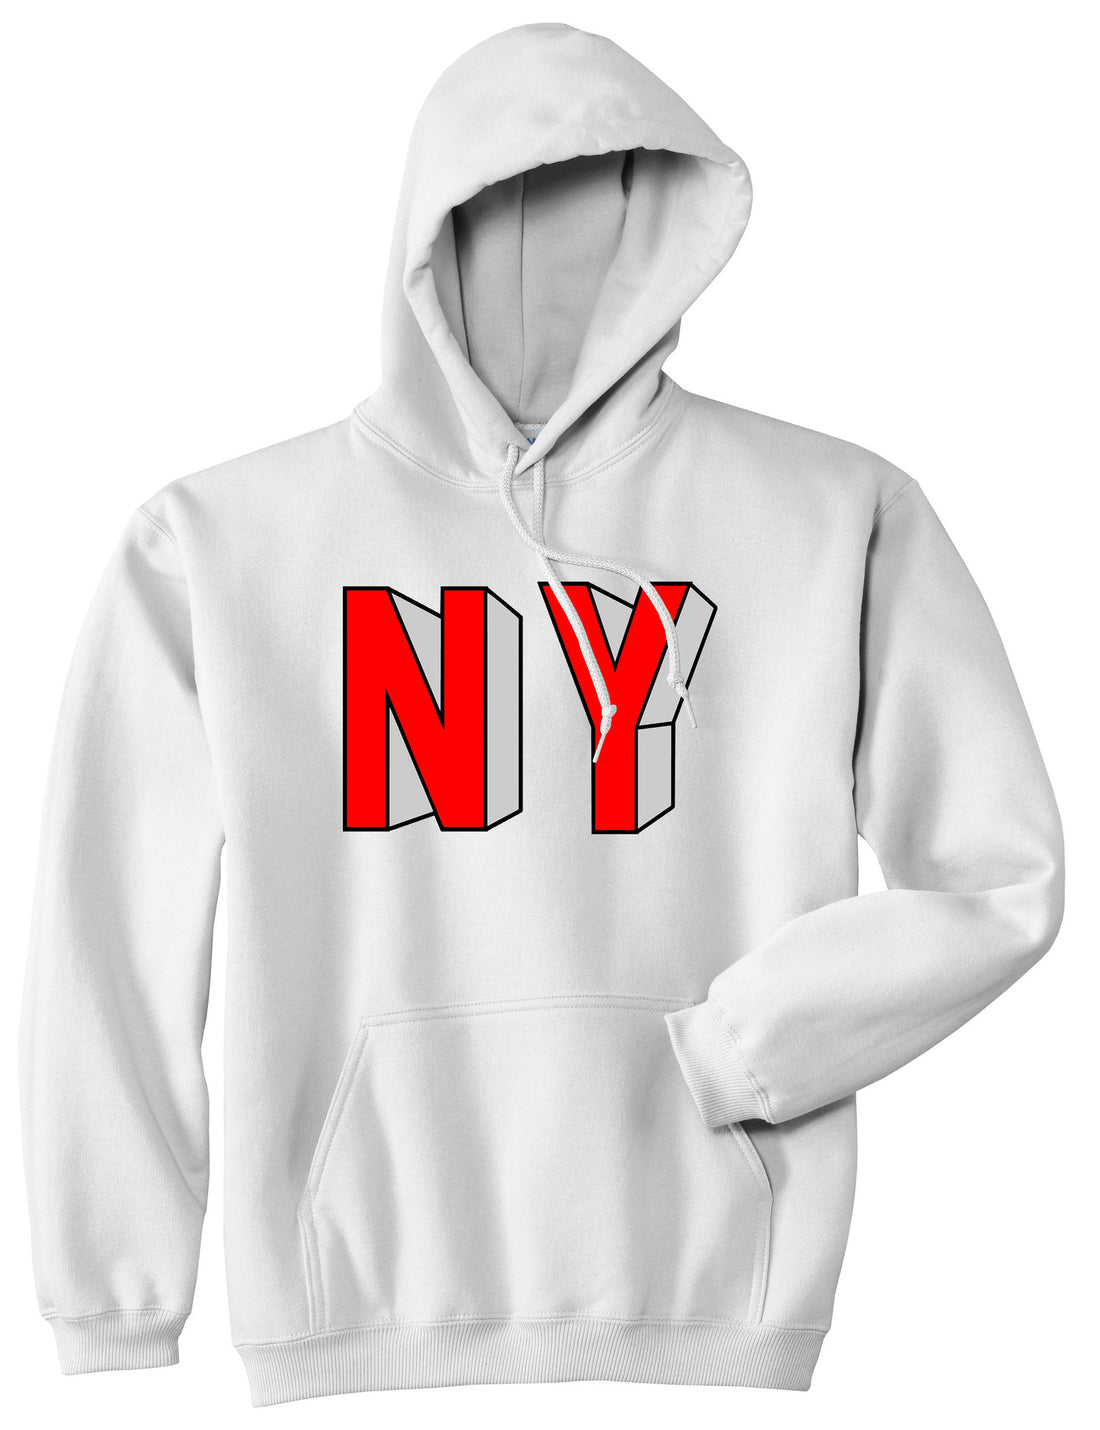 NY Block Letters Pullover Hoodie in White